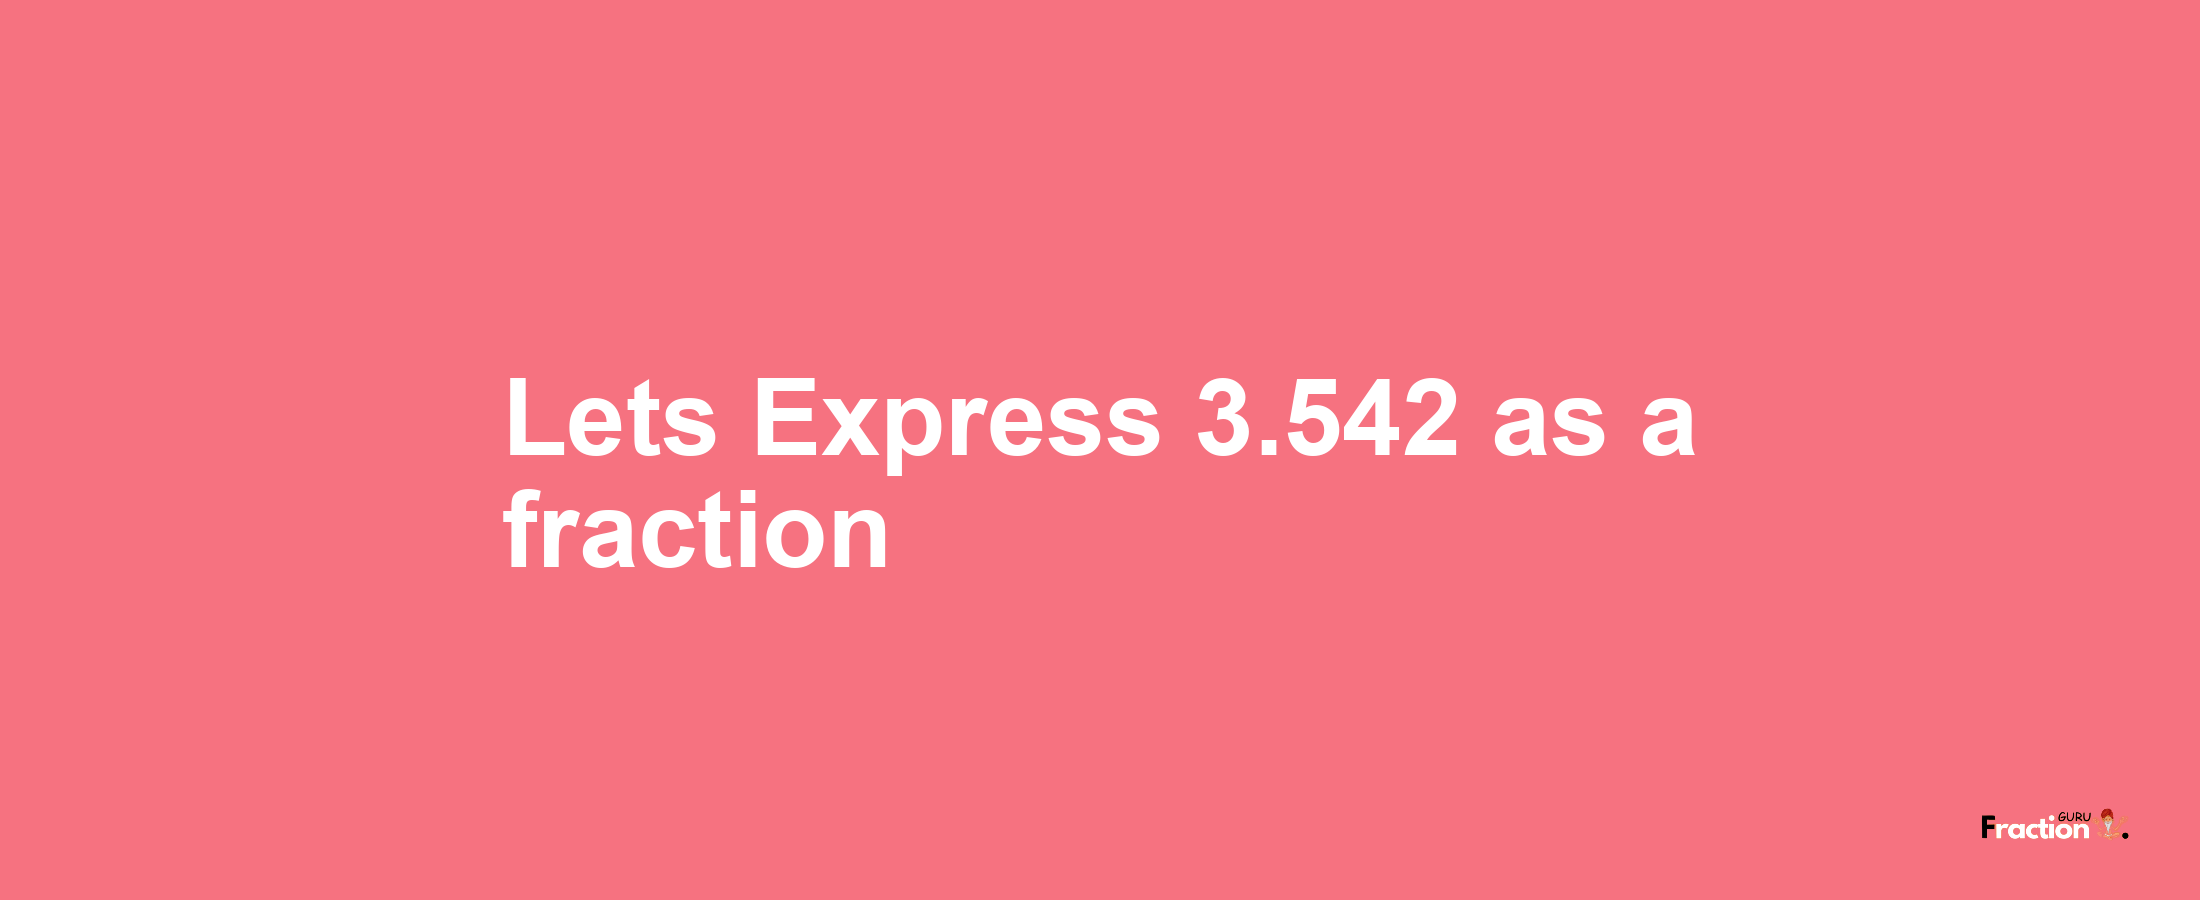 Lets Express 3.542 as afraction